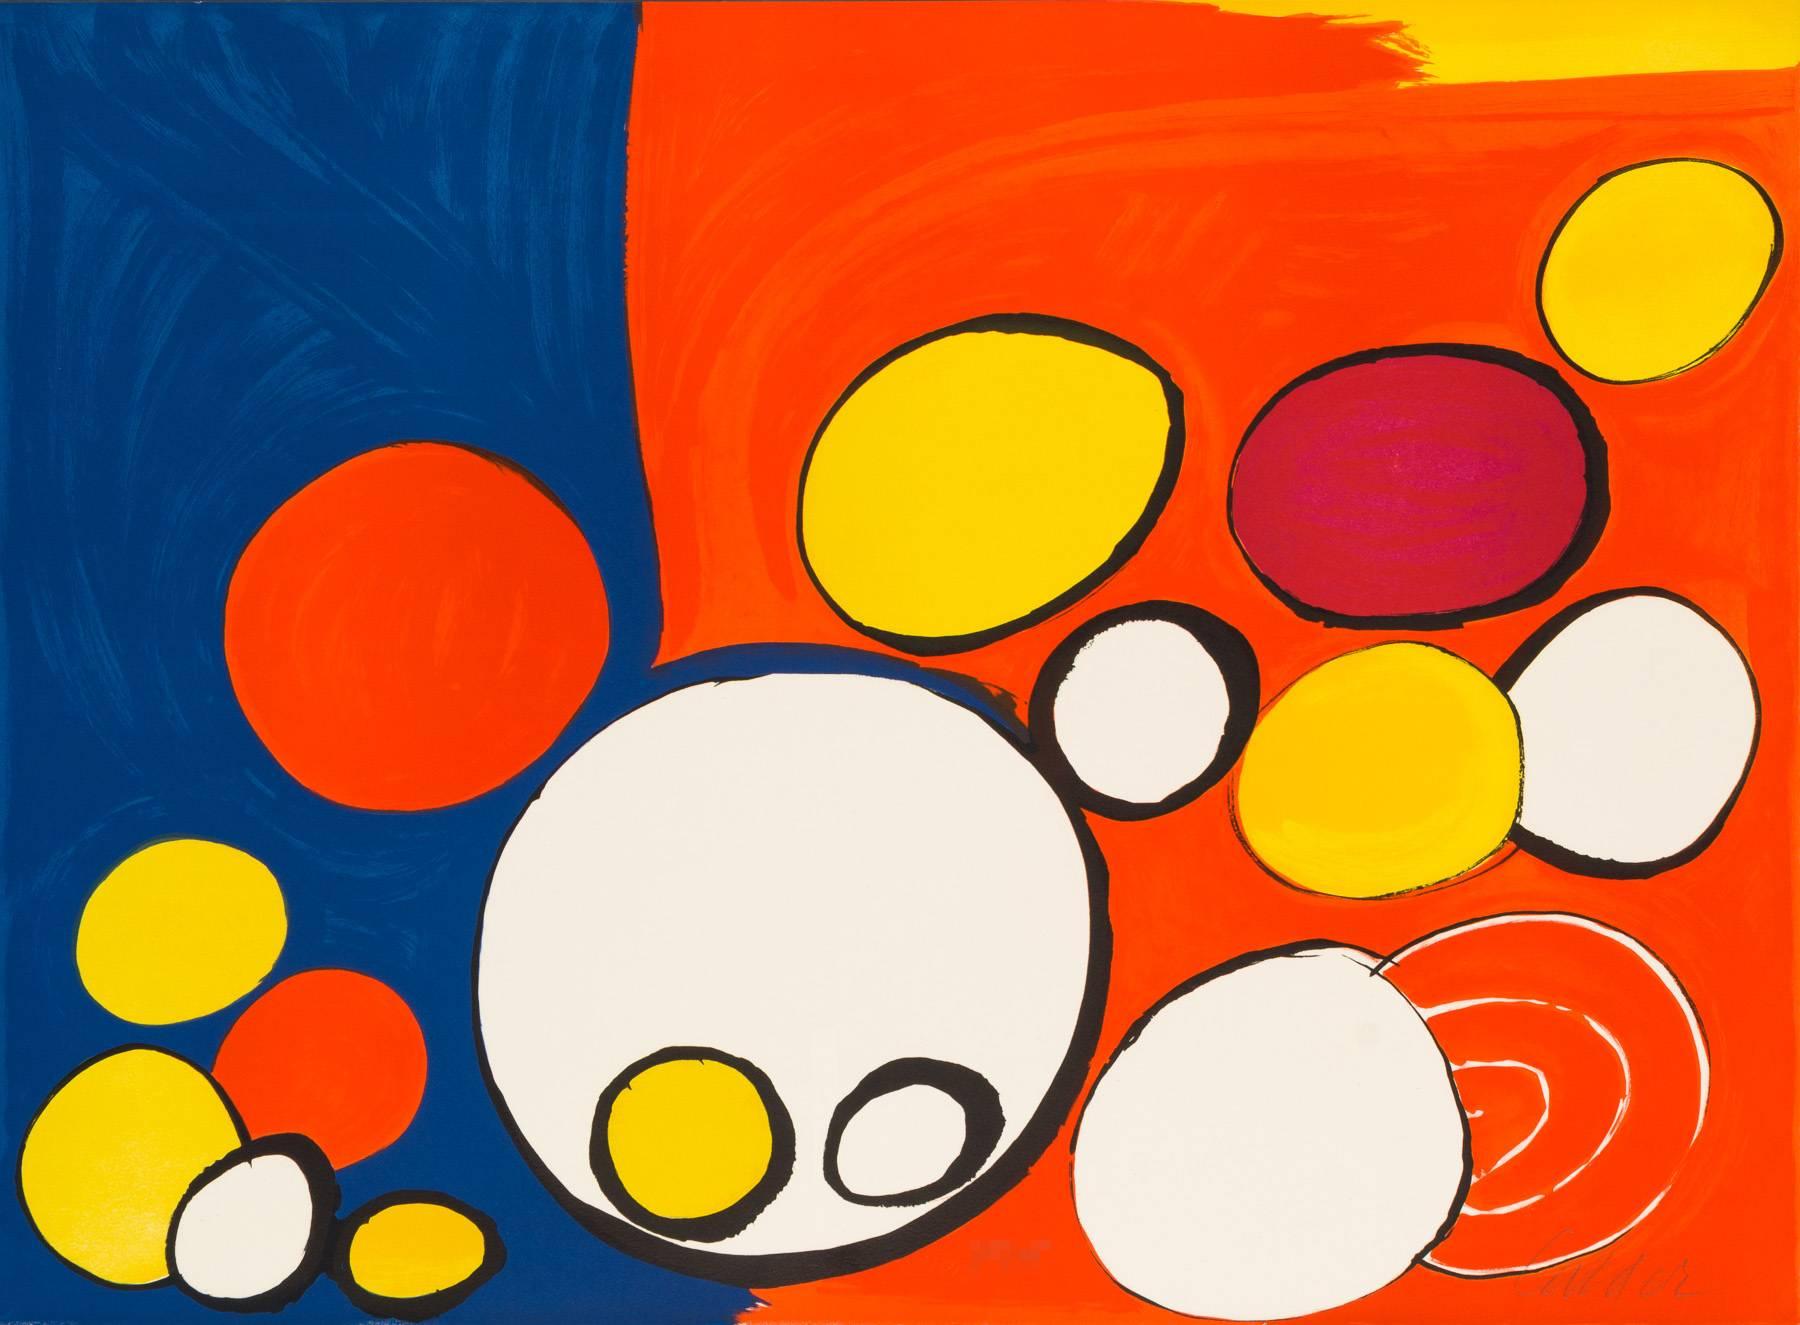 Alexander Calder Abstract Print - Untitled from "Our Unfinished Revolution"